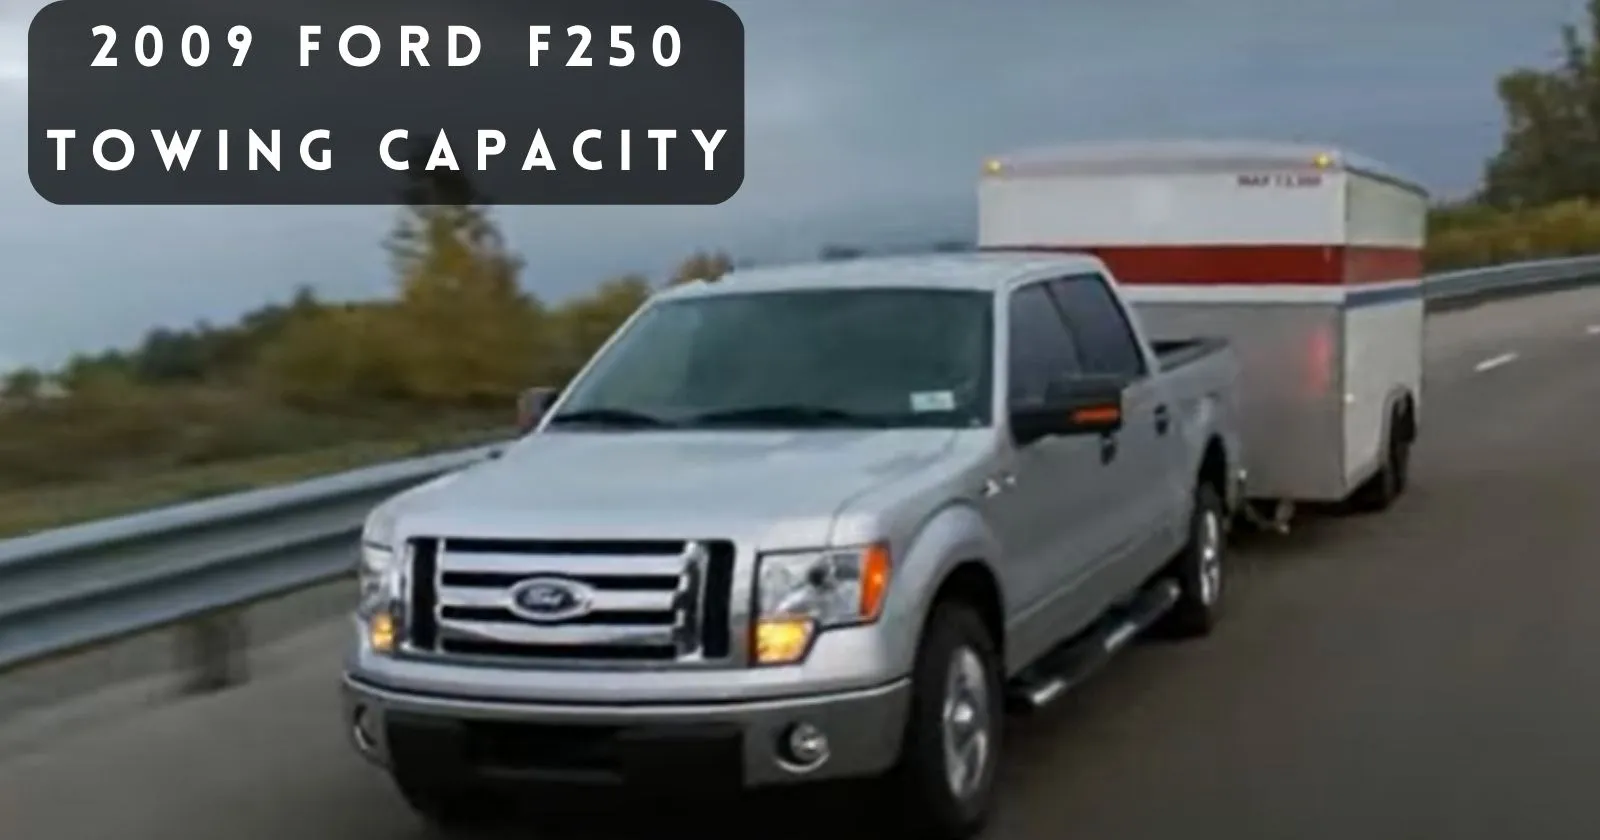 explore-2009-ford-f250-towing-capacity-thecartowing